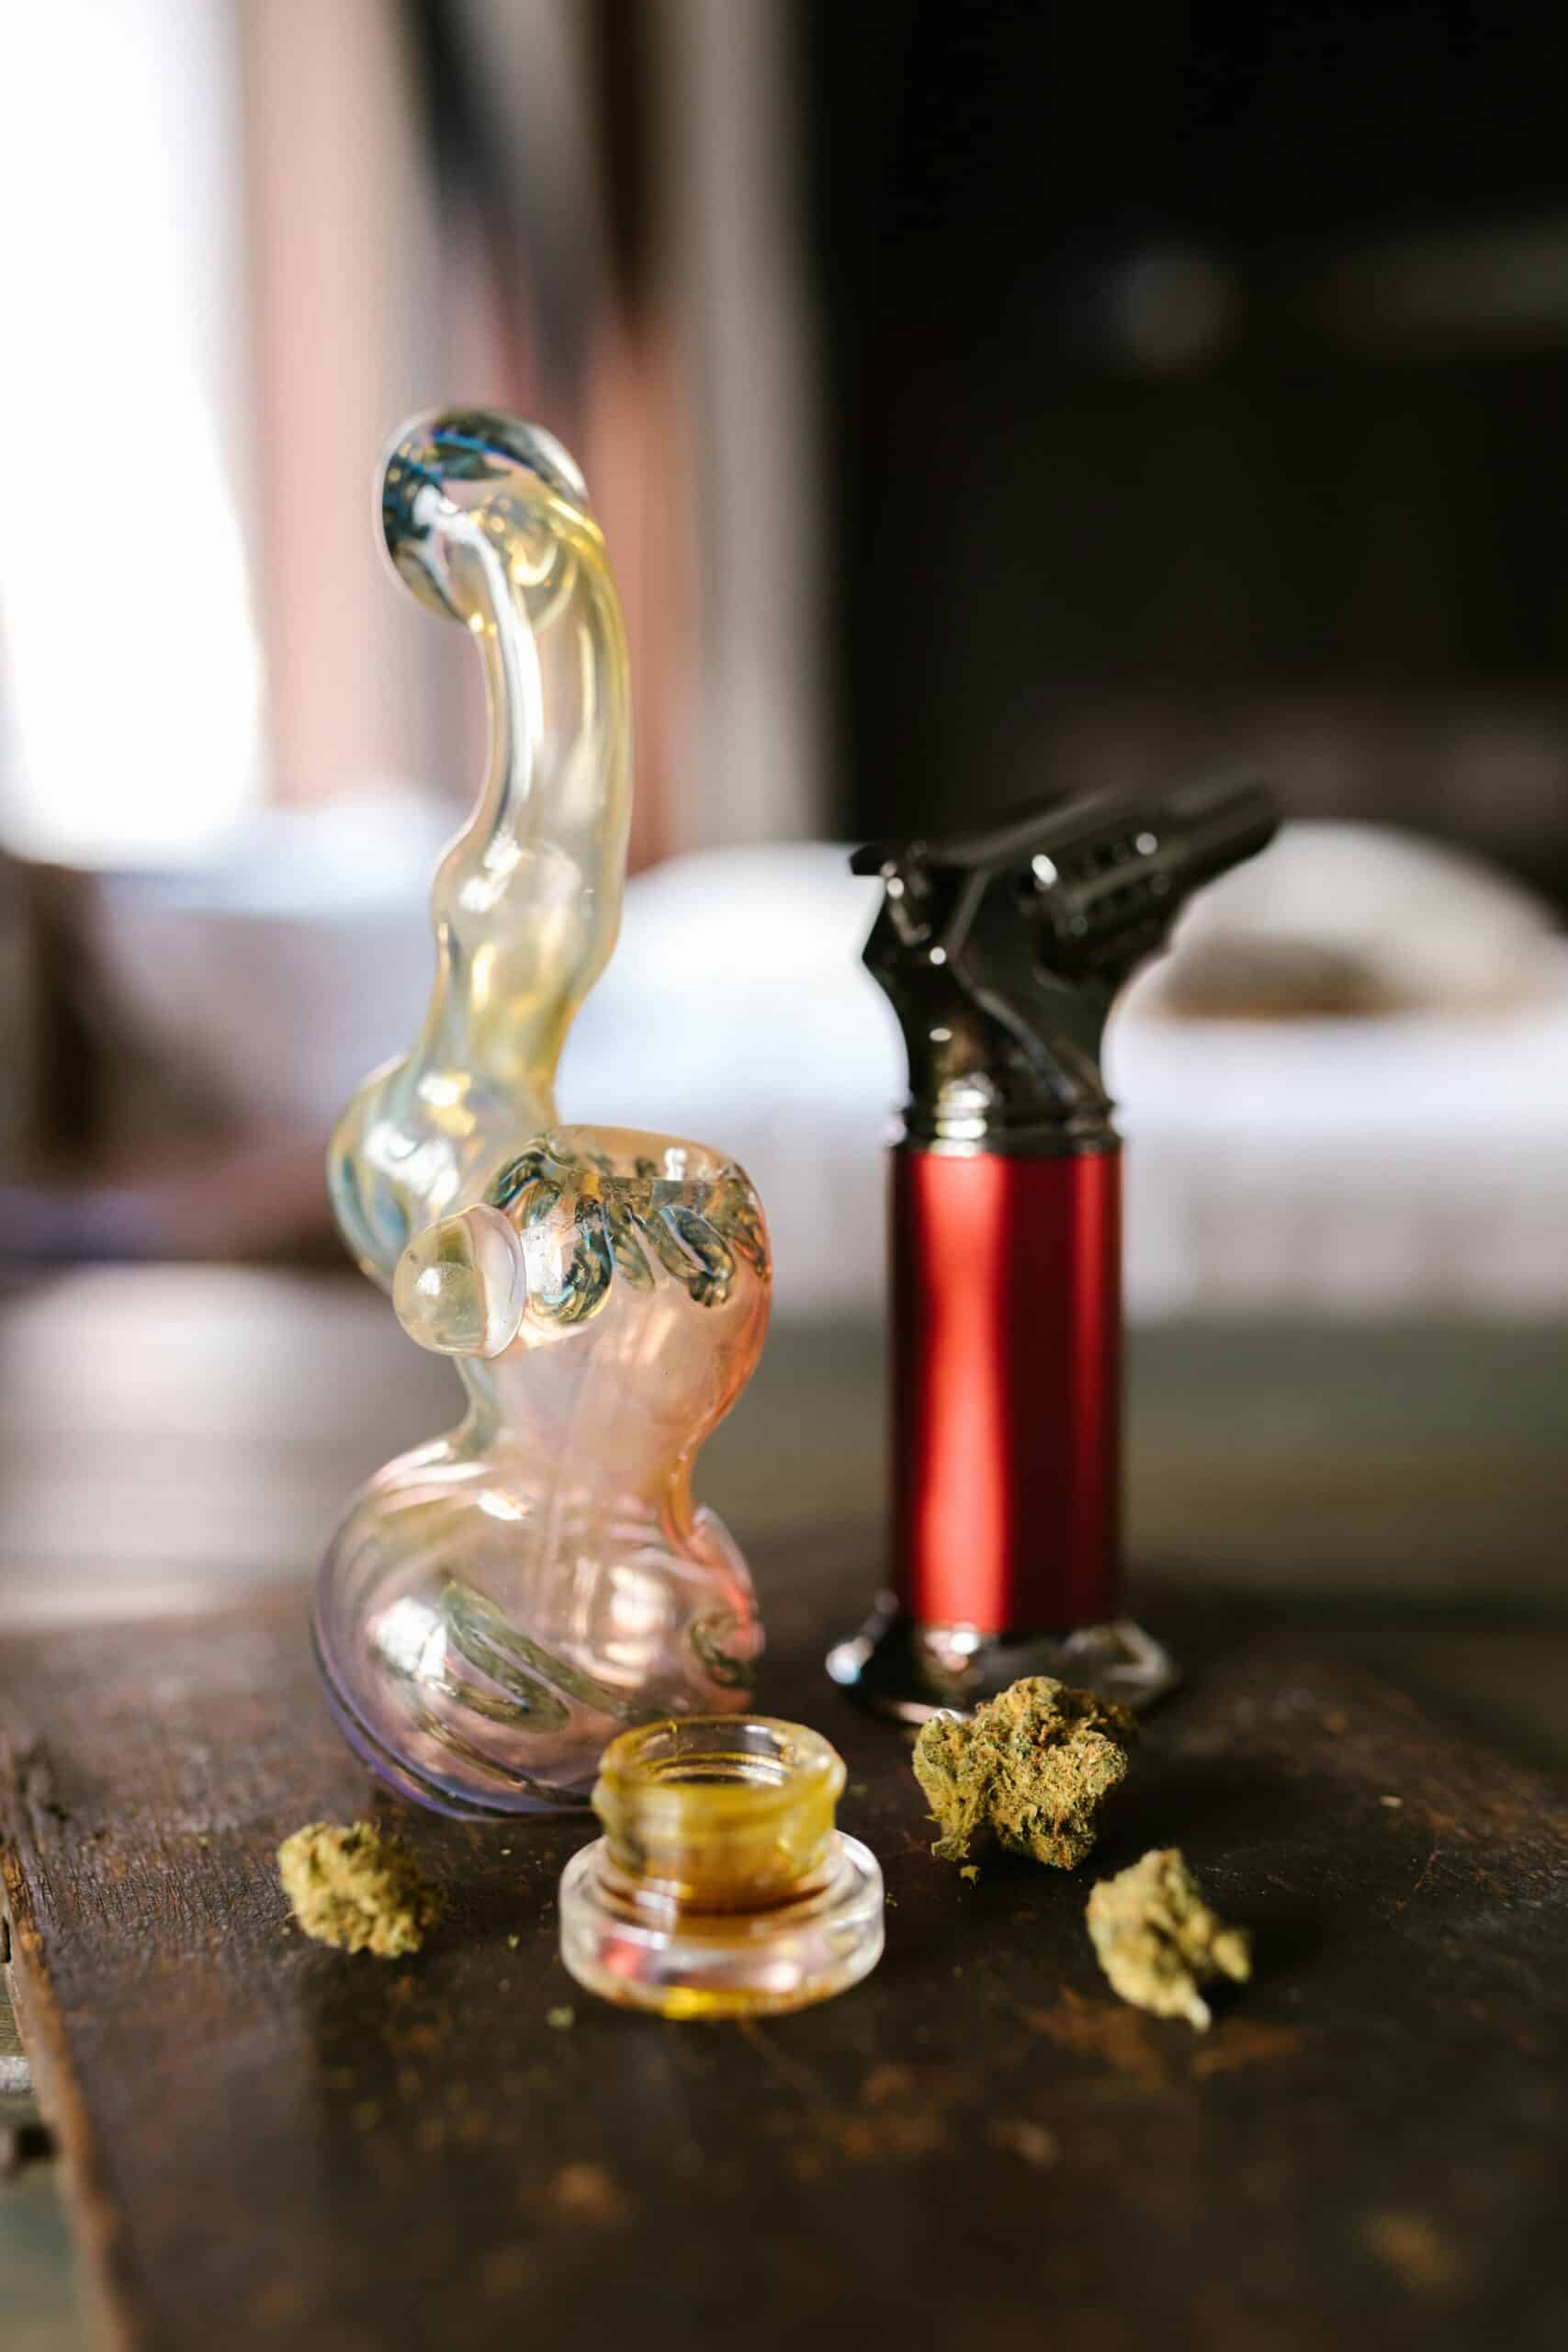 Crystal Clear Pipes: How to Clean Glass or Ceramic Pipes